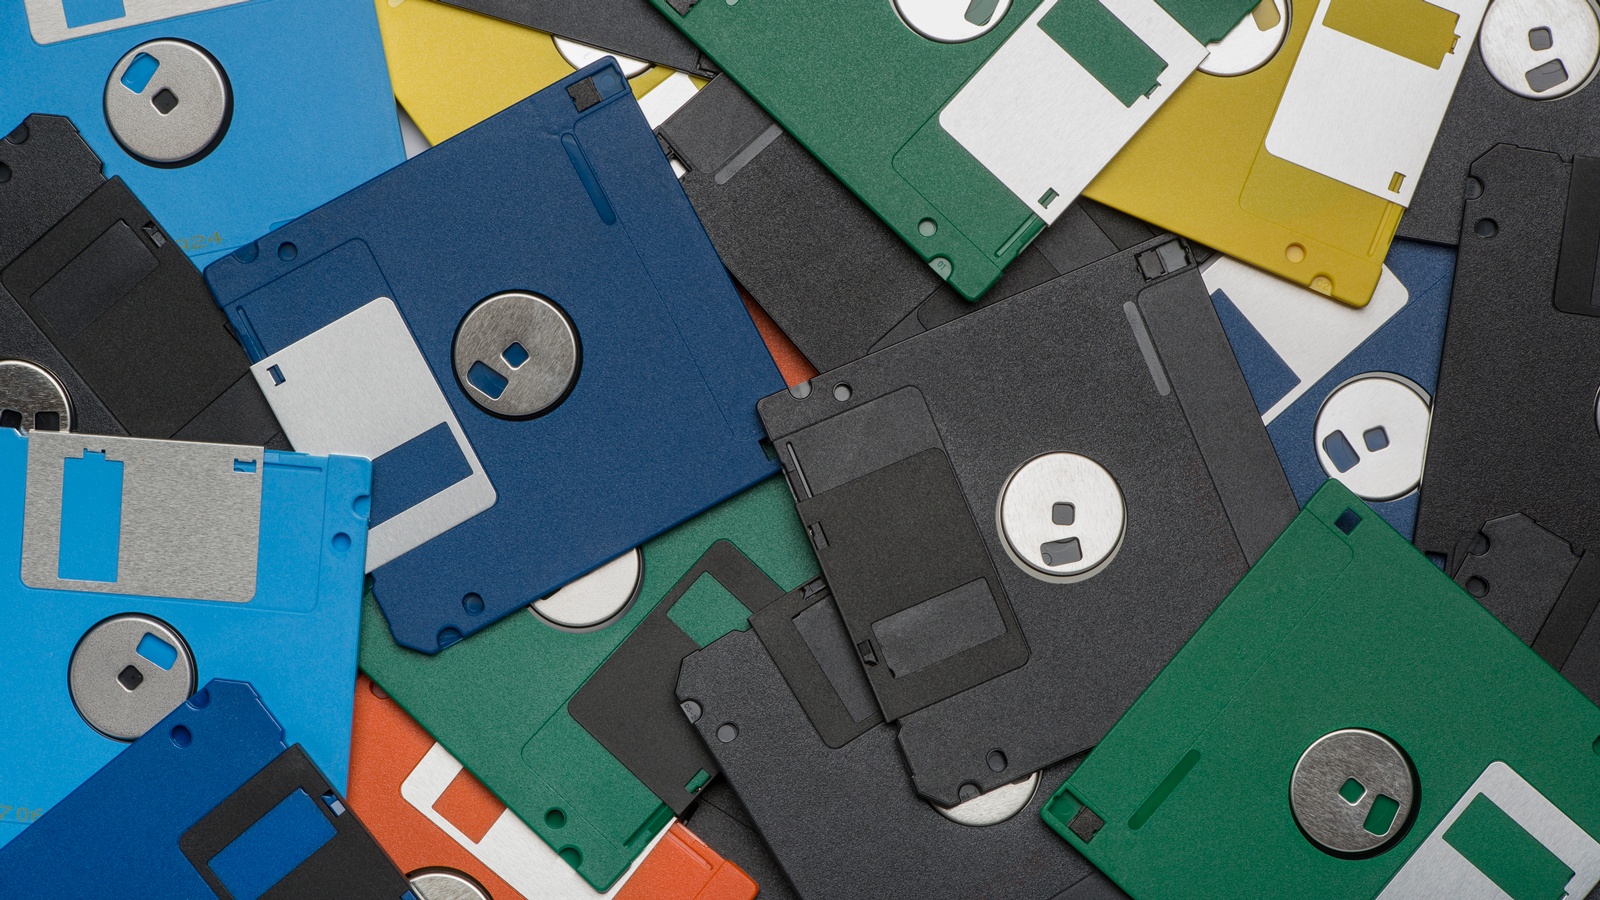 Japan’s government finally ditches the floppy disk in all its systems